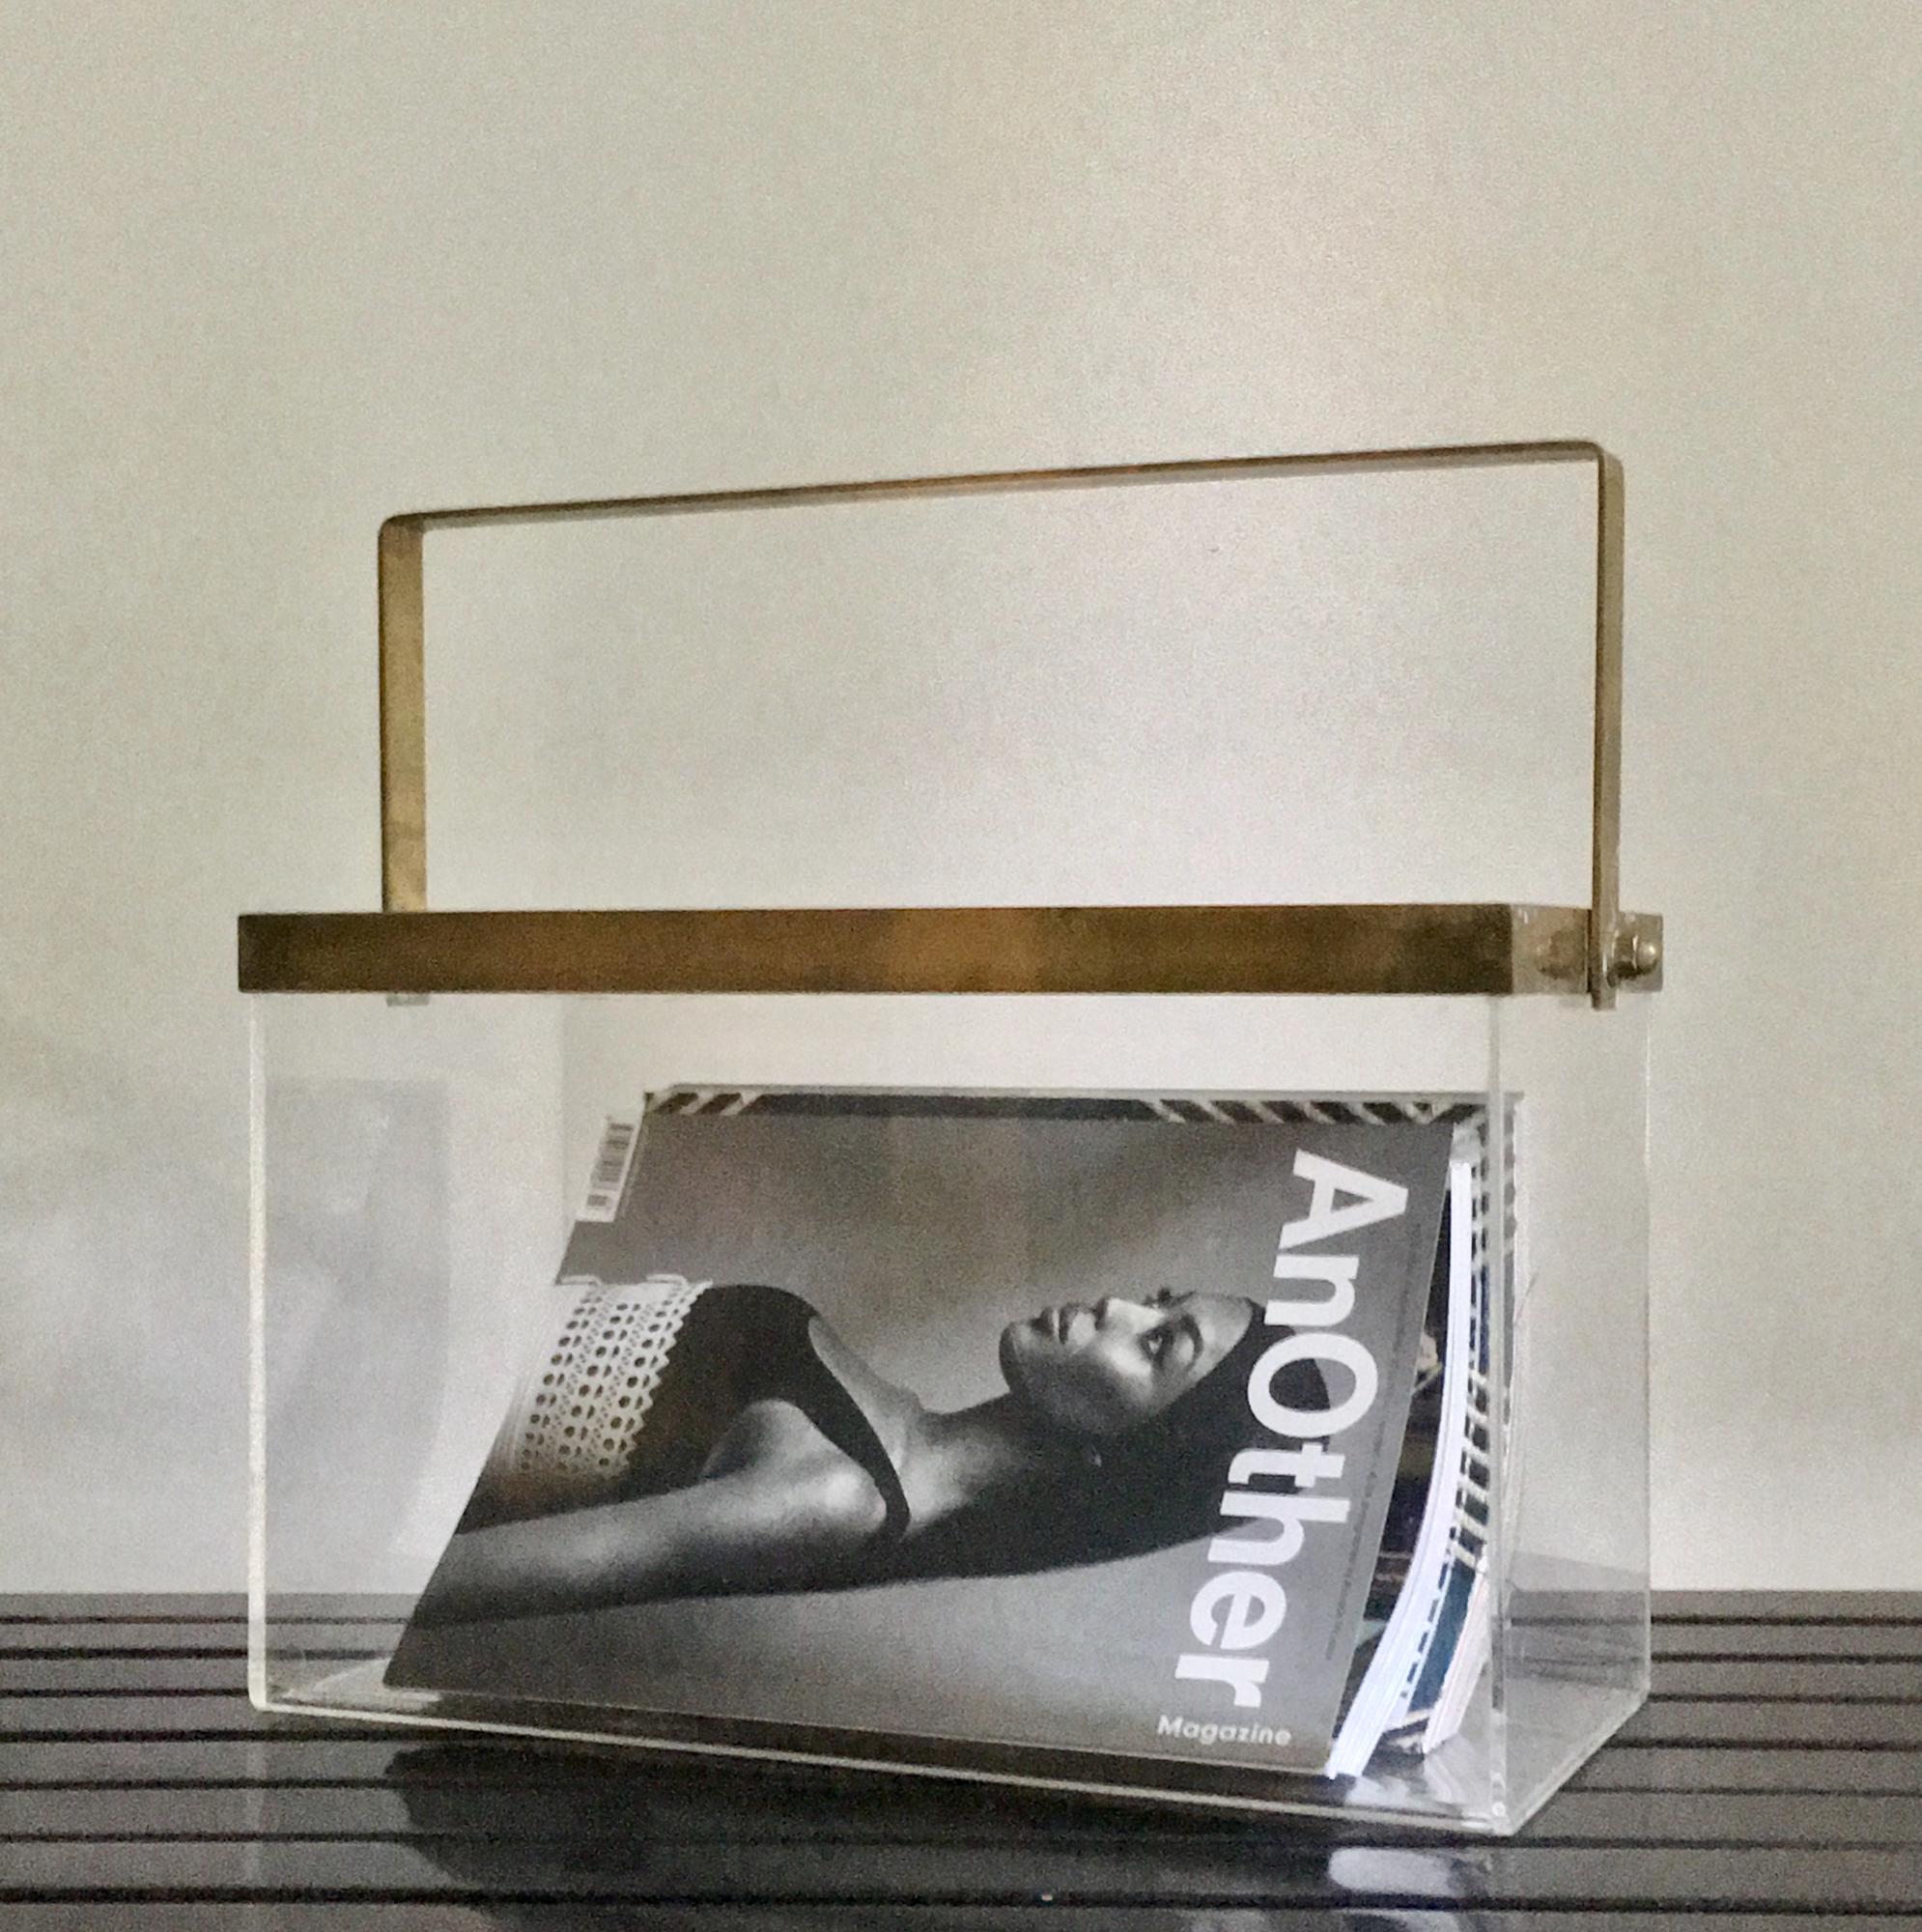 Nice, simple magazine holder of bent-plexiglass with brass handle and trim. European 1970s.

Very nice piece, stylish and practical, which presents well and could work in many spaces. Good original condition. Lots of patina to the brass and light